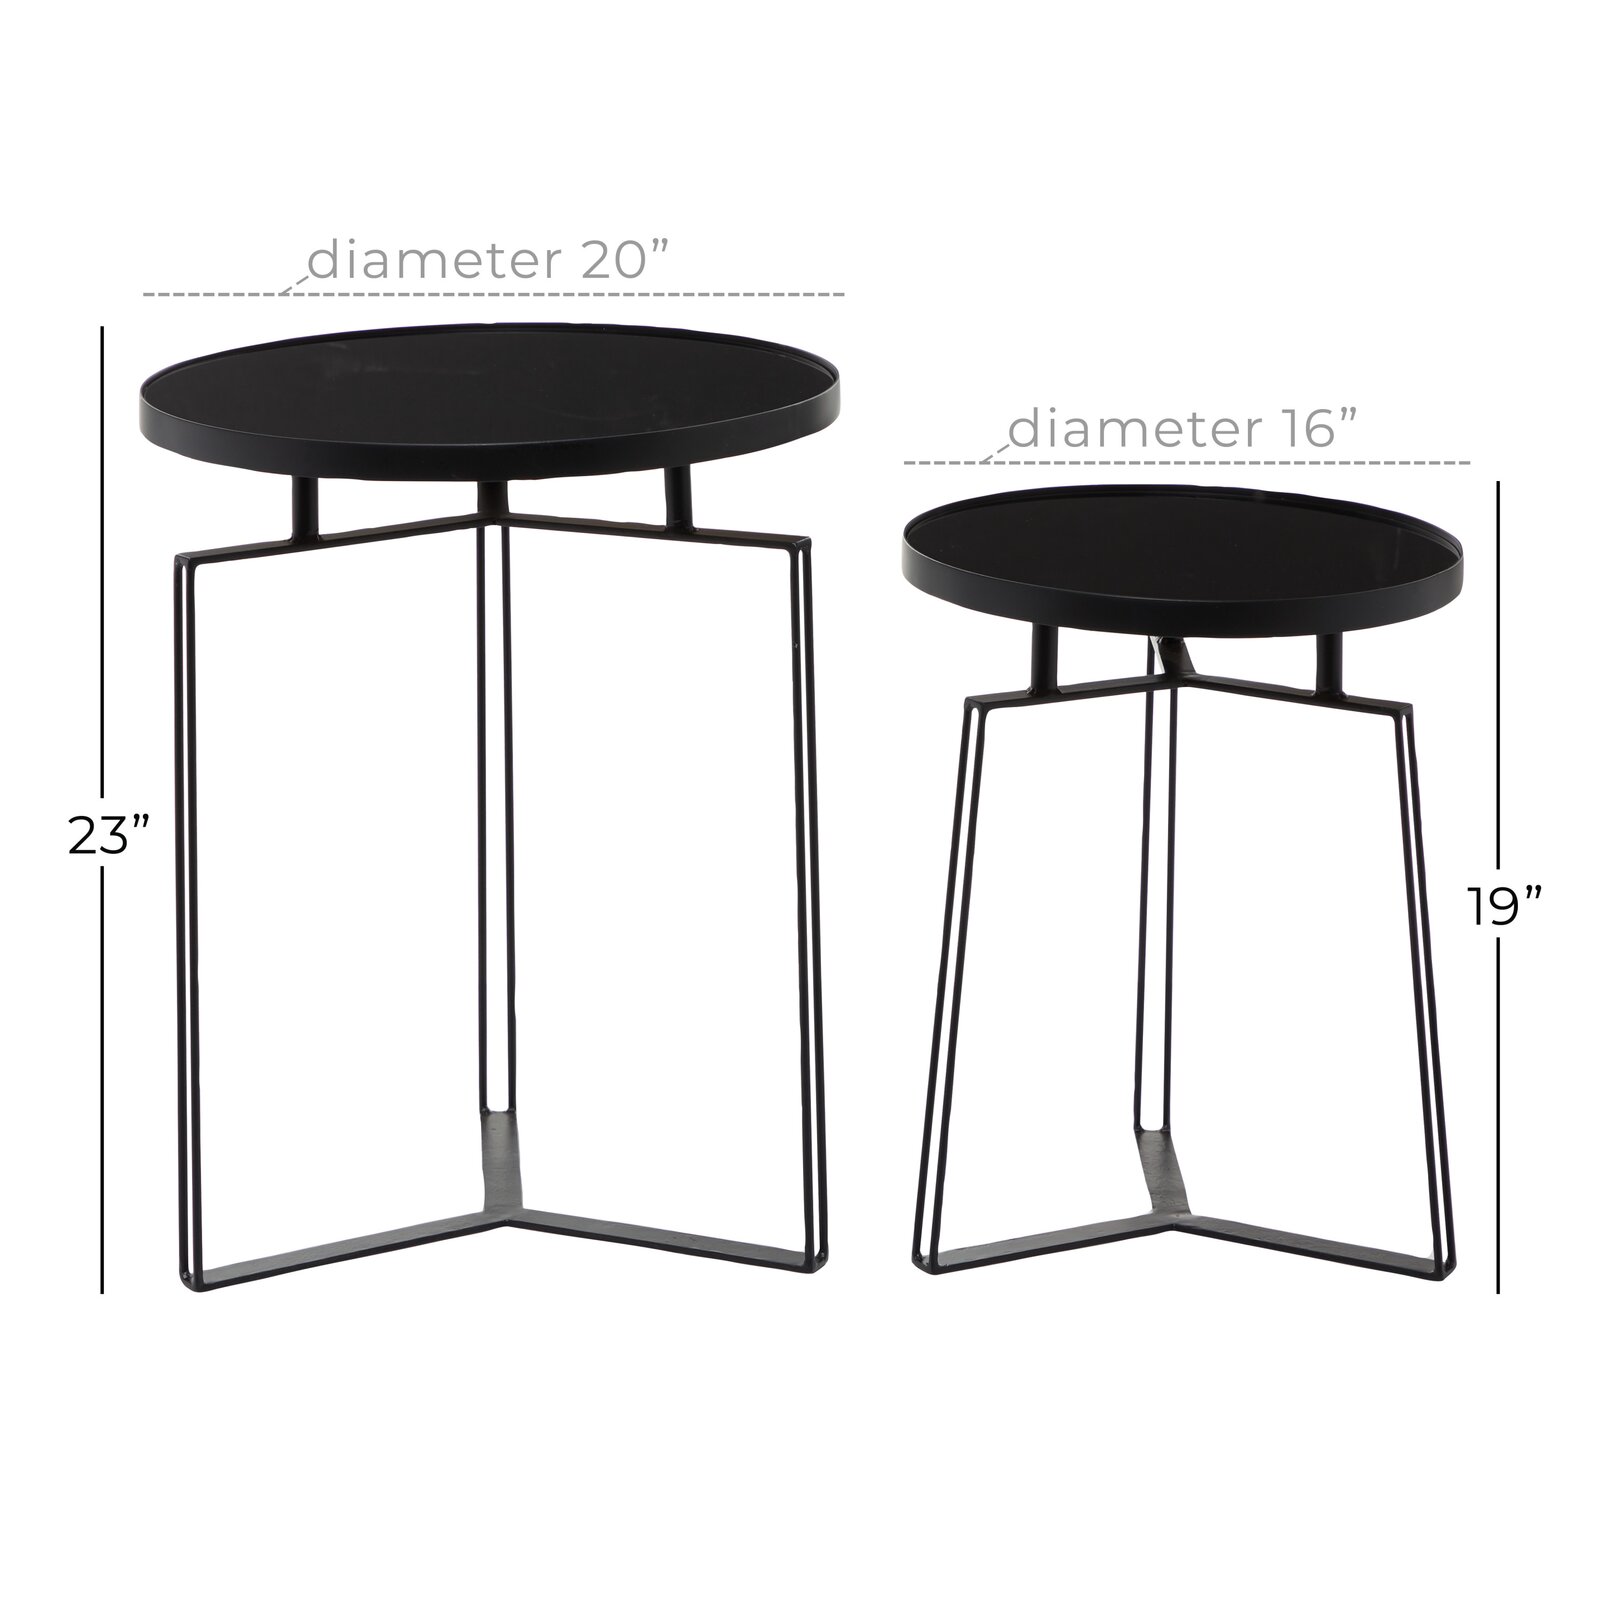 Cleorand Glass Top Frame Nesting Tables, Base Color: Black, Small Table:  19'' H x 16'' W x 16'' D